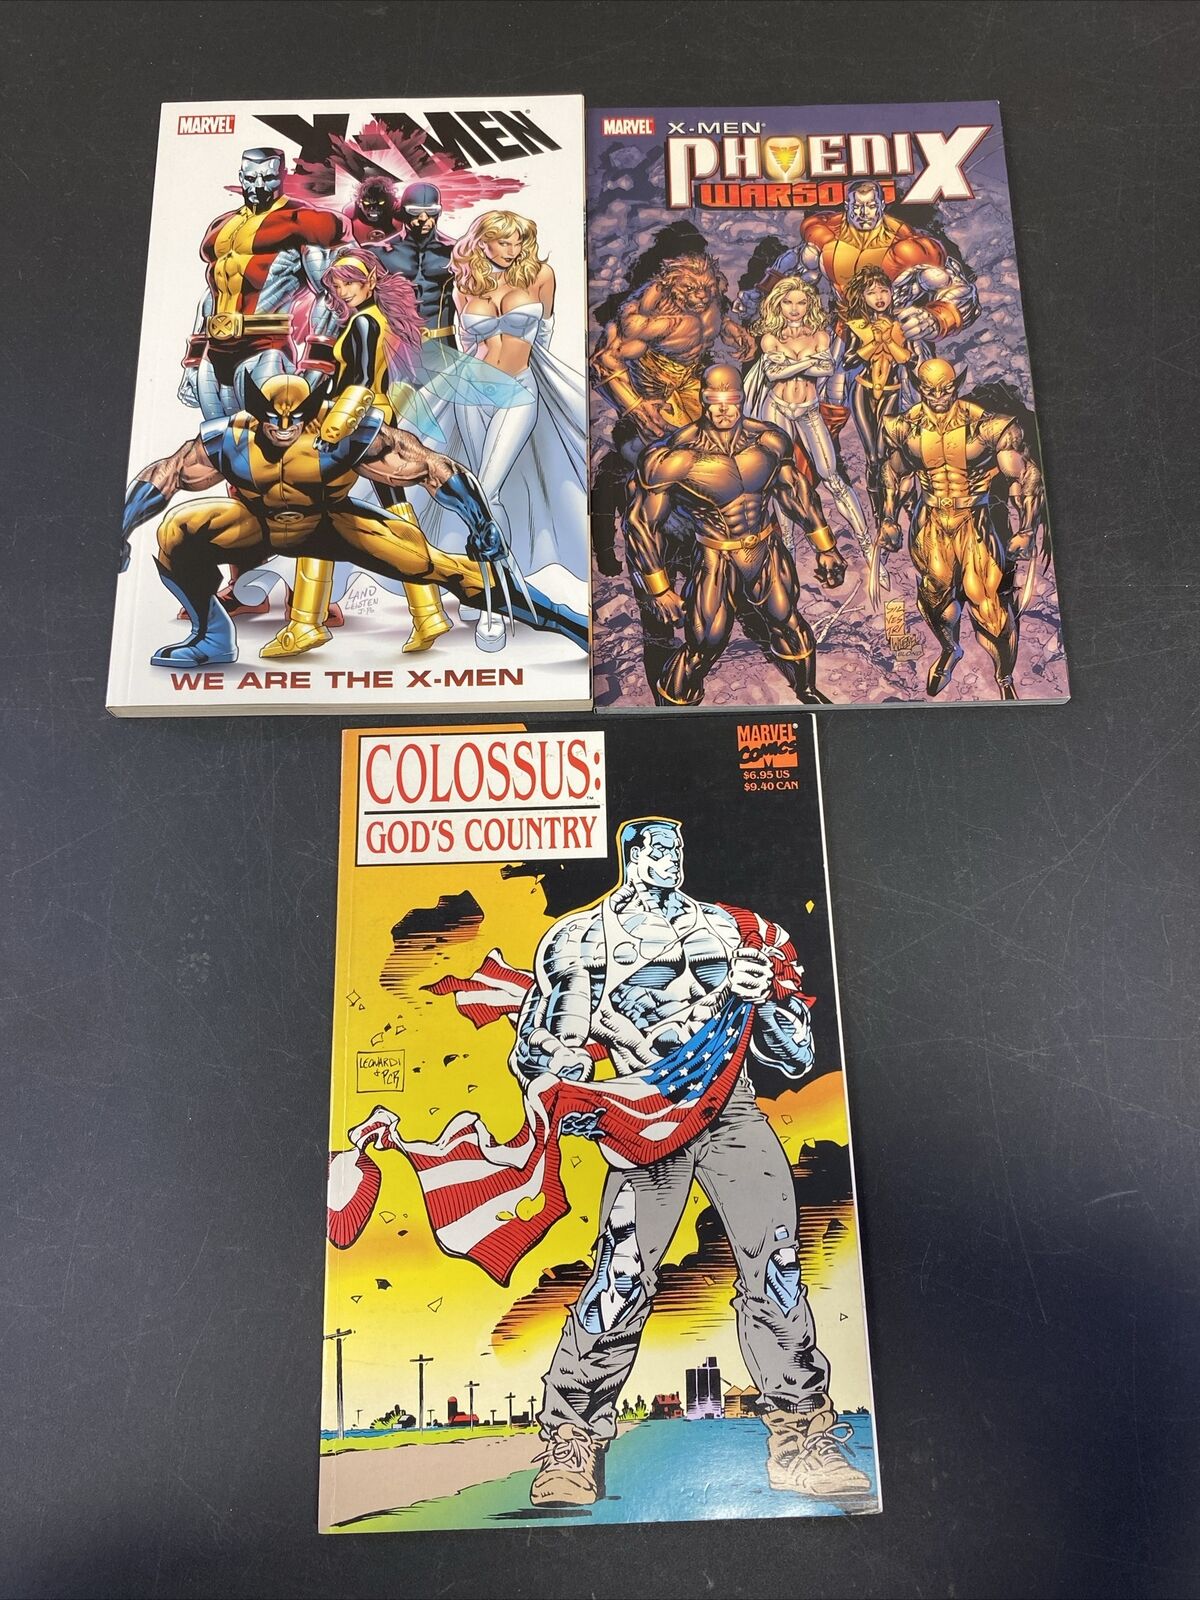 COLOSSUS: God's Country, X-Men: Phoenix War Song & We Are The X-Men TPB LOT of 3